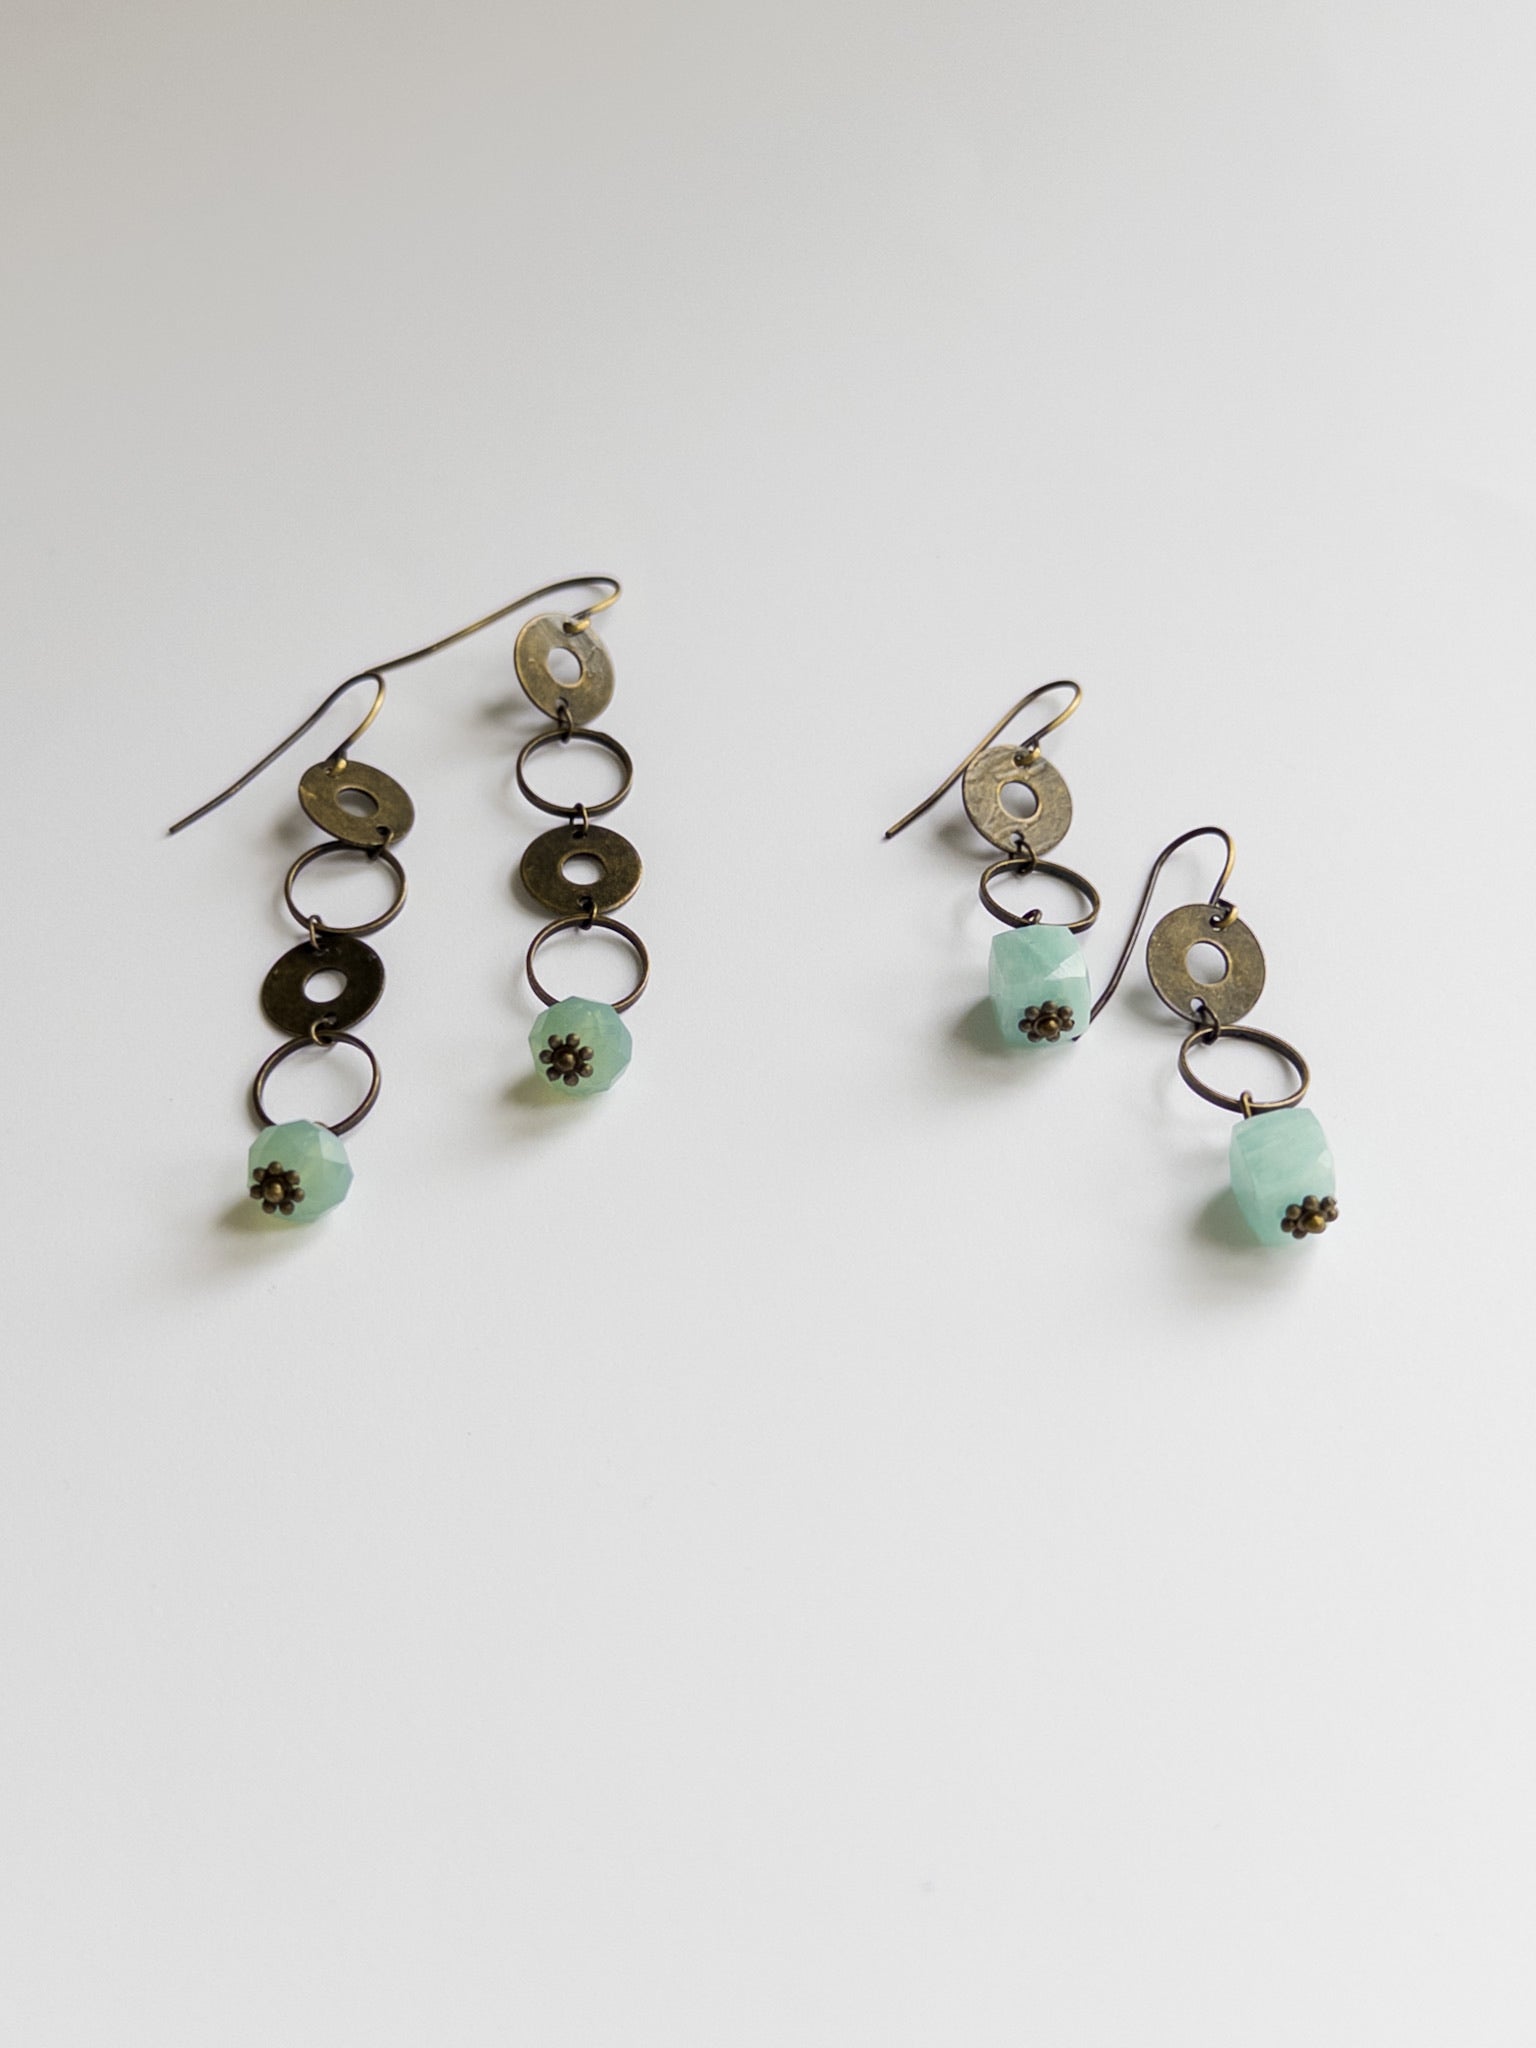 Short and Long earrings in the nh Aragonite Mixed Metals Collection 